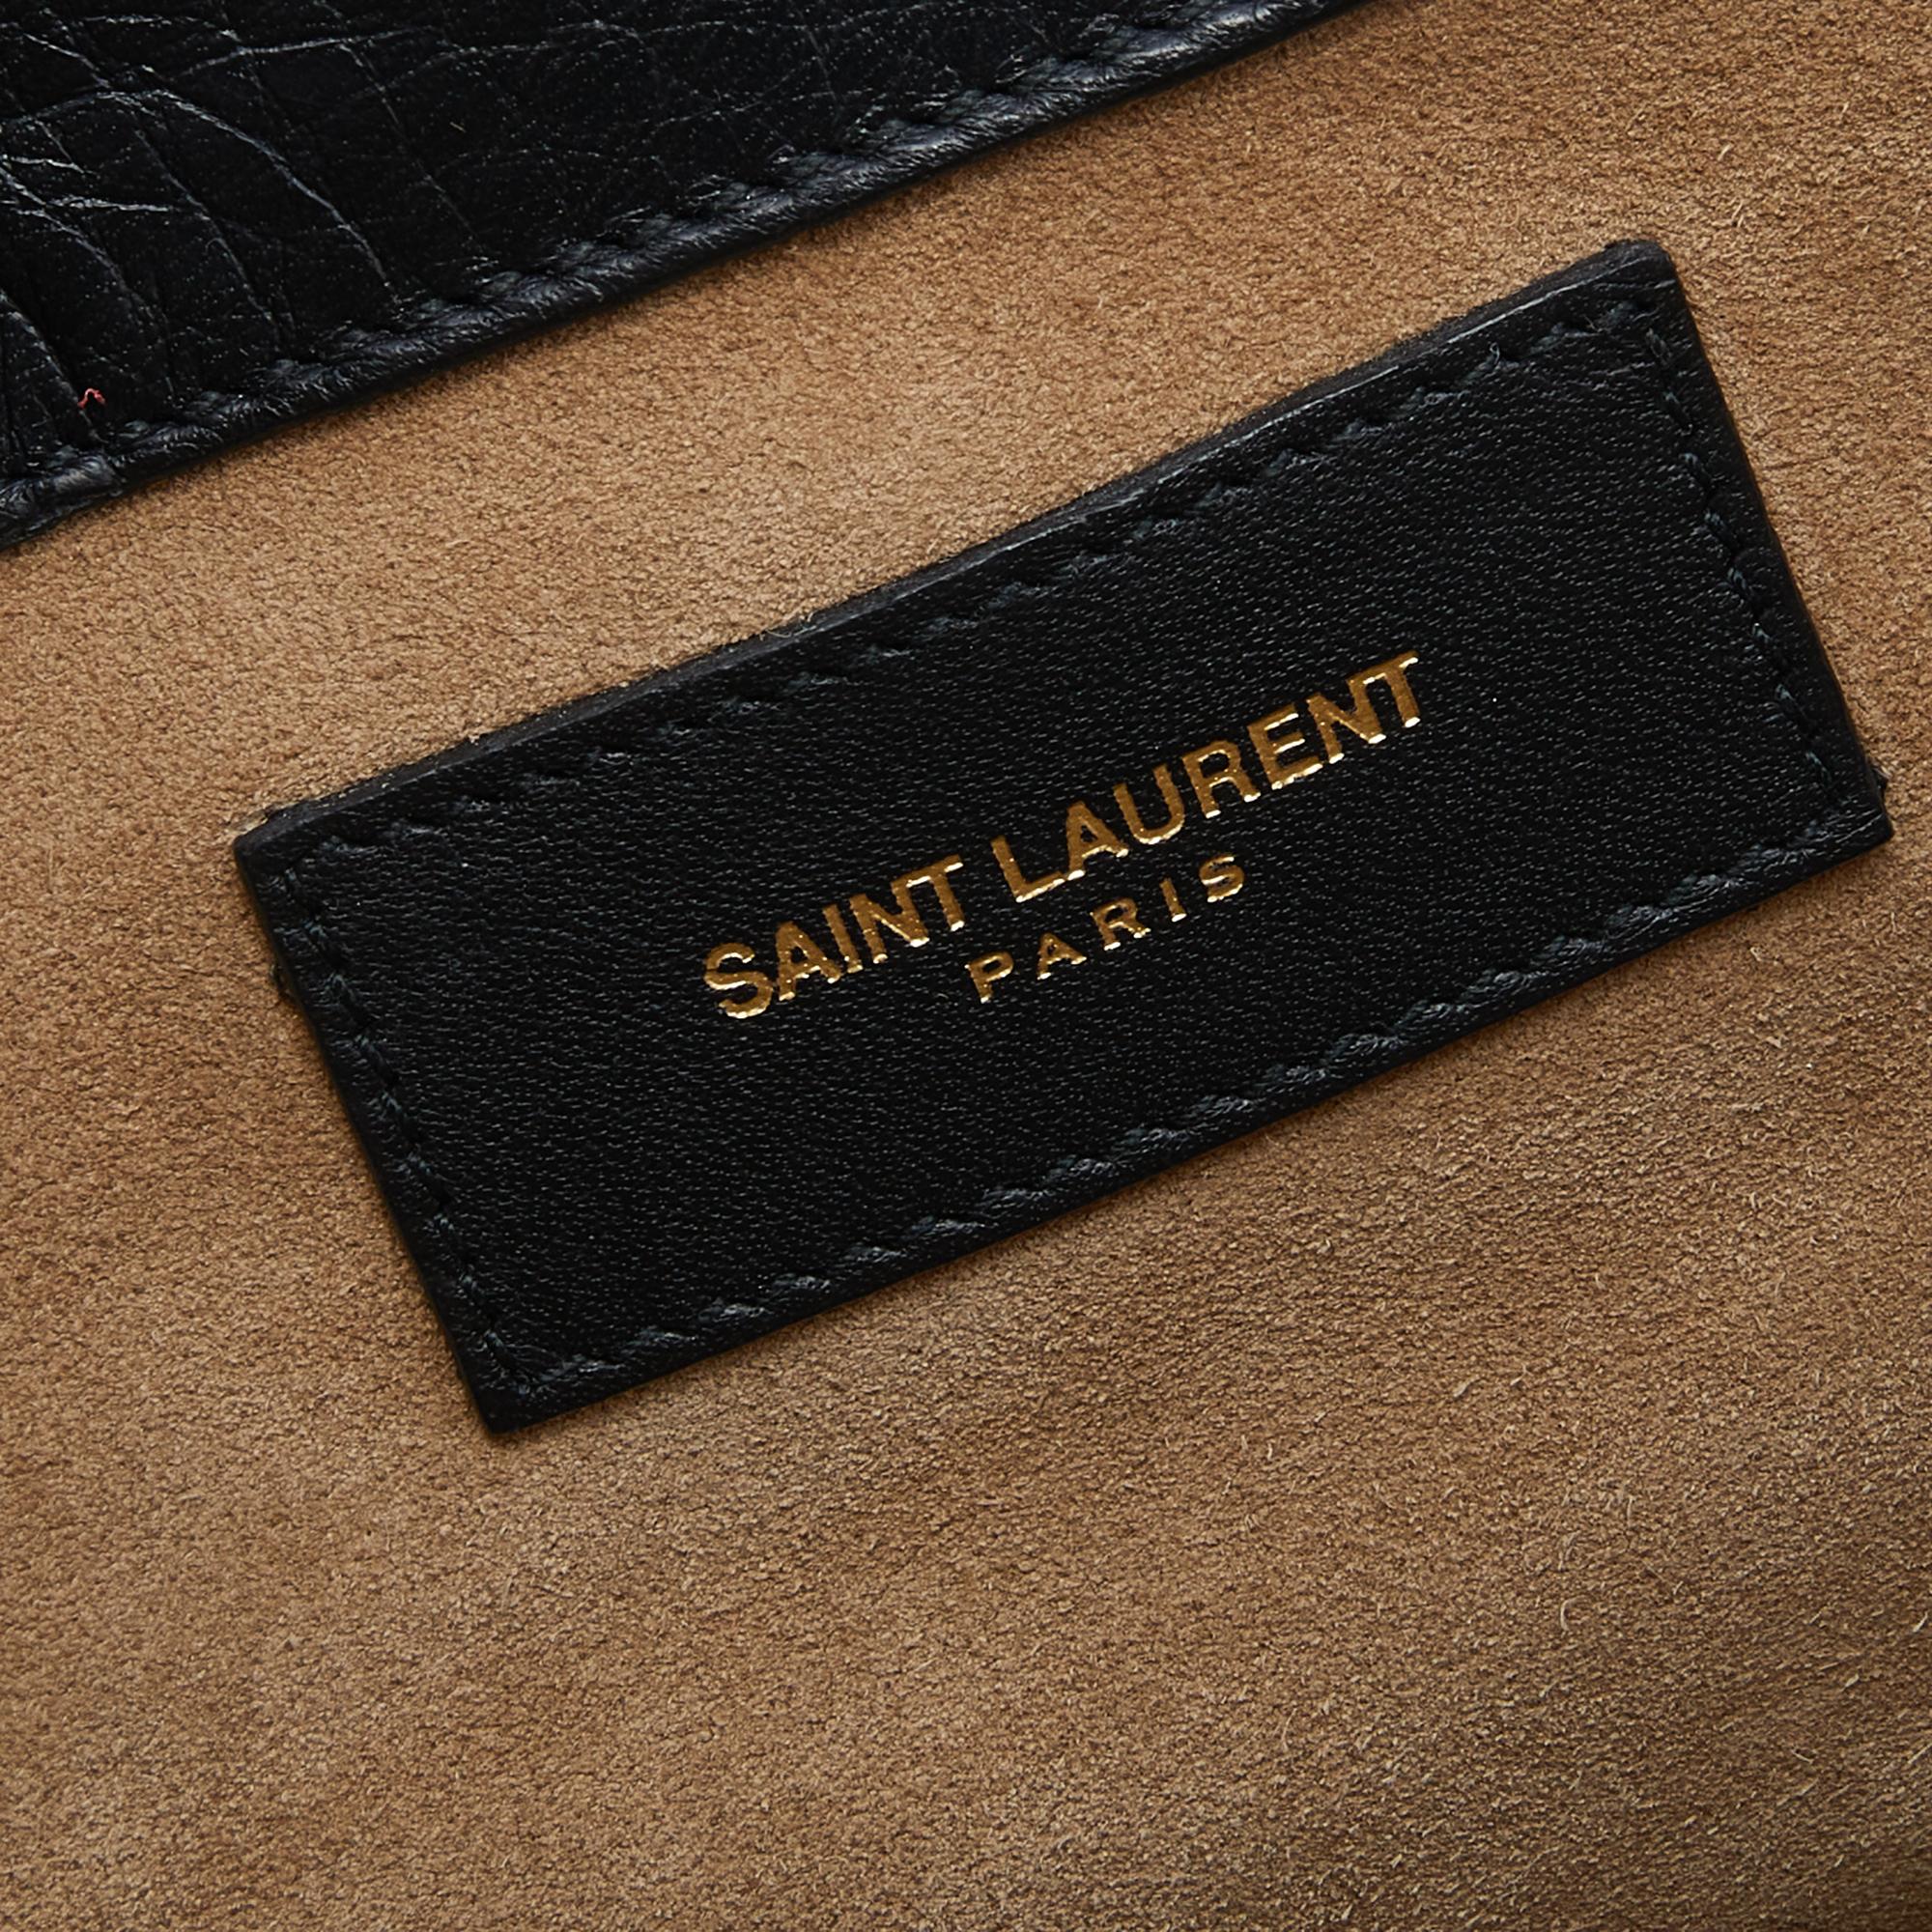 Saint Laurent Black/Beige Leather and Suede Muse Two Top Handle Bag 2